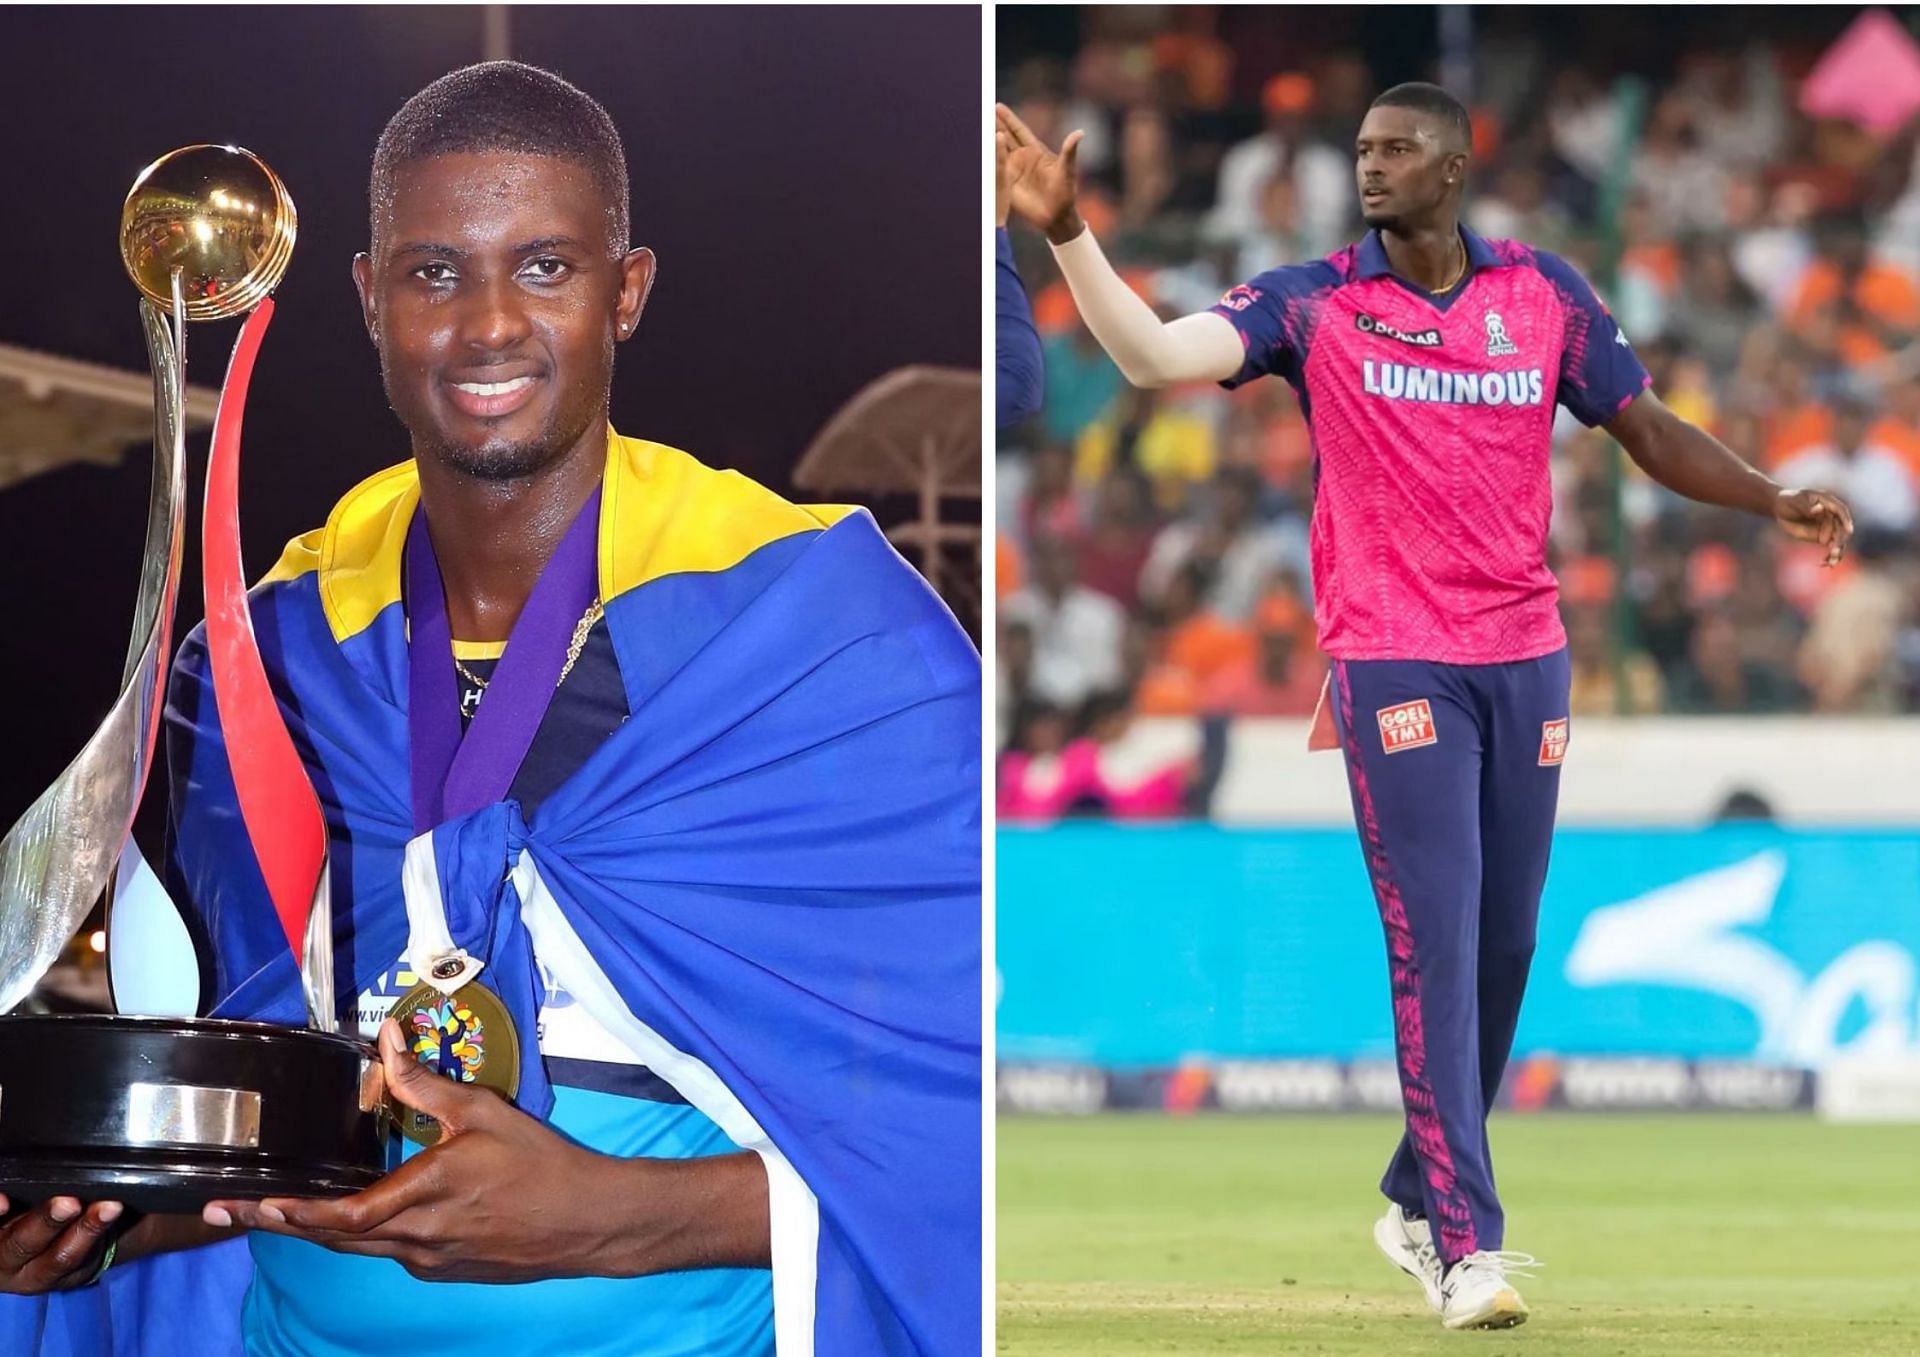 Jason Holder captained the Barbados Tridents (now Royals) to their second CPL title in 2015 (Picture Credits: Getty; BCCI).